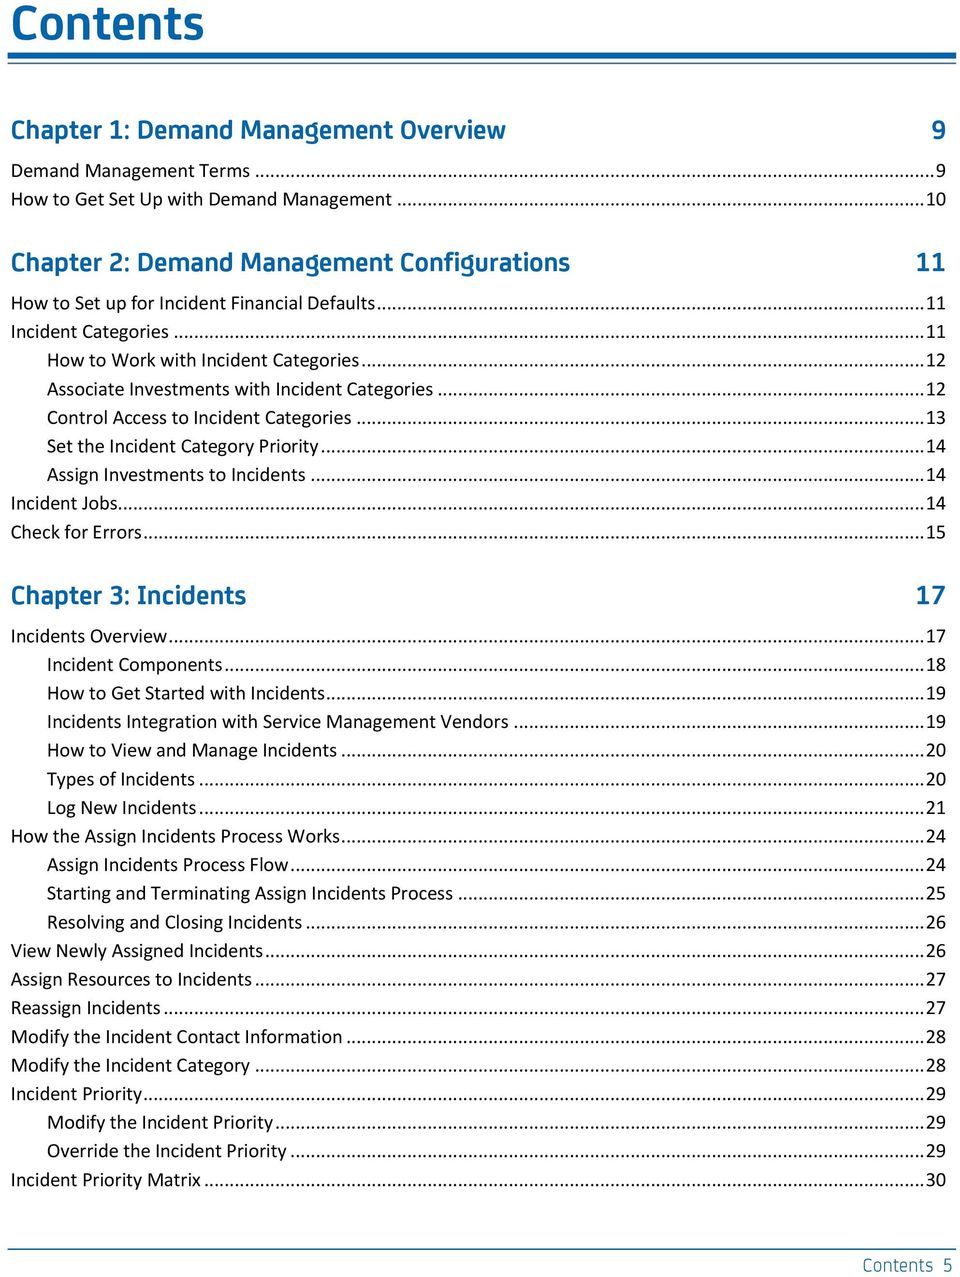 .. 12 Associate Investments with Incident Categories... 12 Control Access to Incident Categories... 13 Set the Incident Category Priority... 14 Assign Investments to Incidents... 14 Incident Jobs.